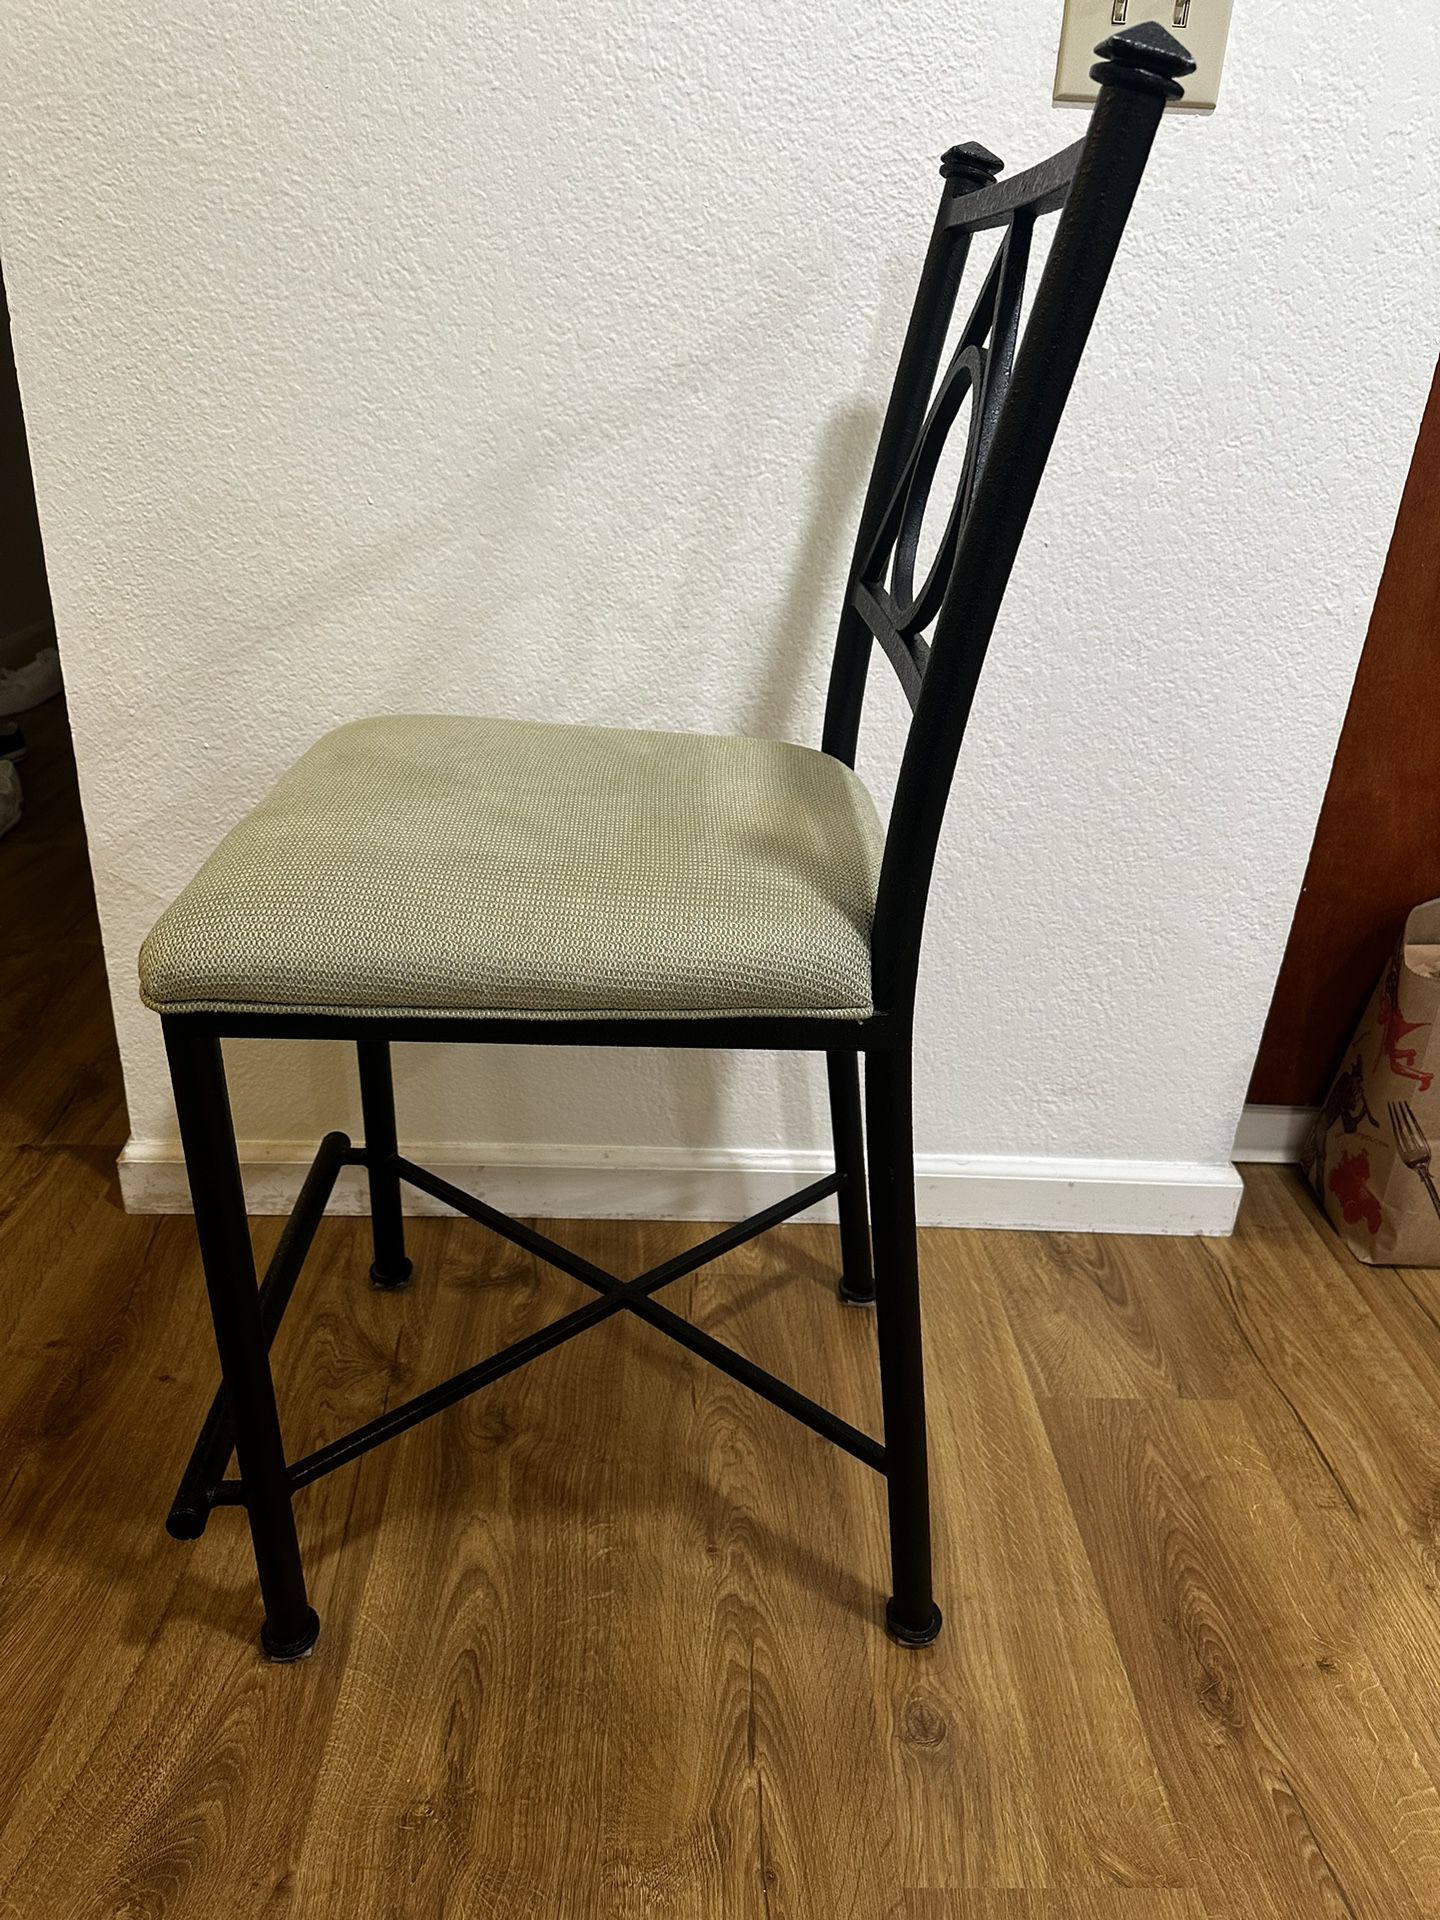 Counter Height Chairs (2)